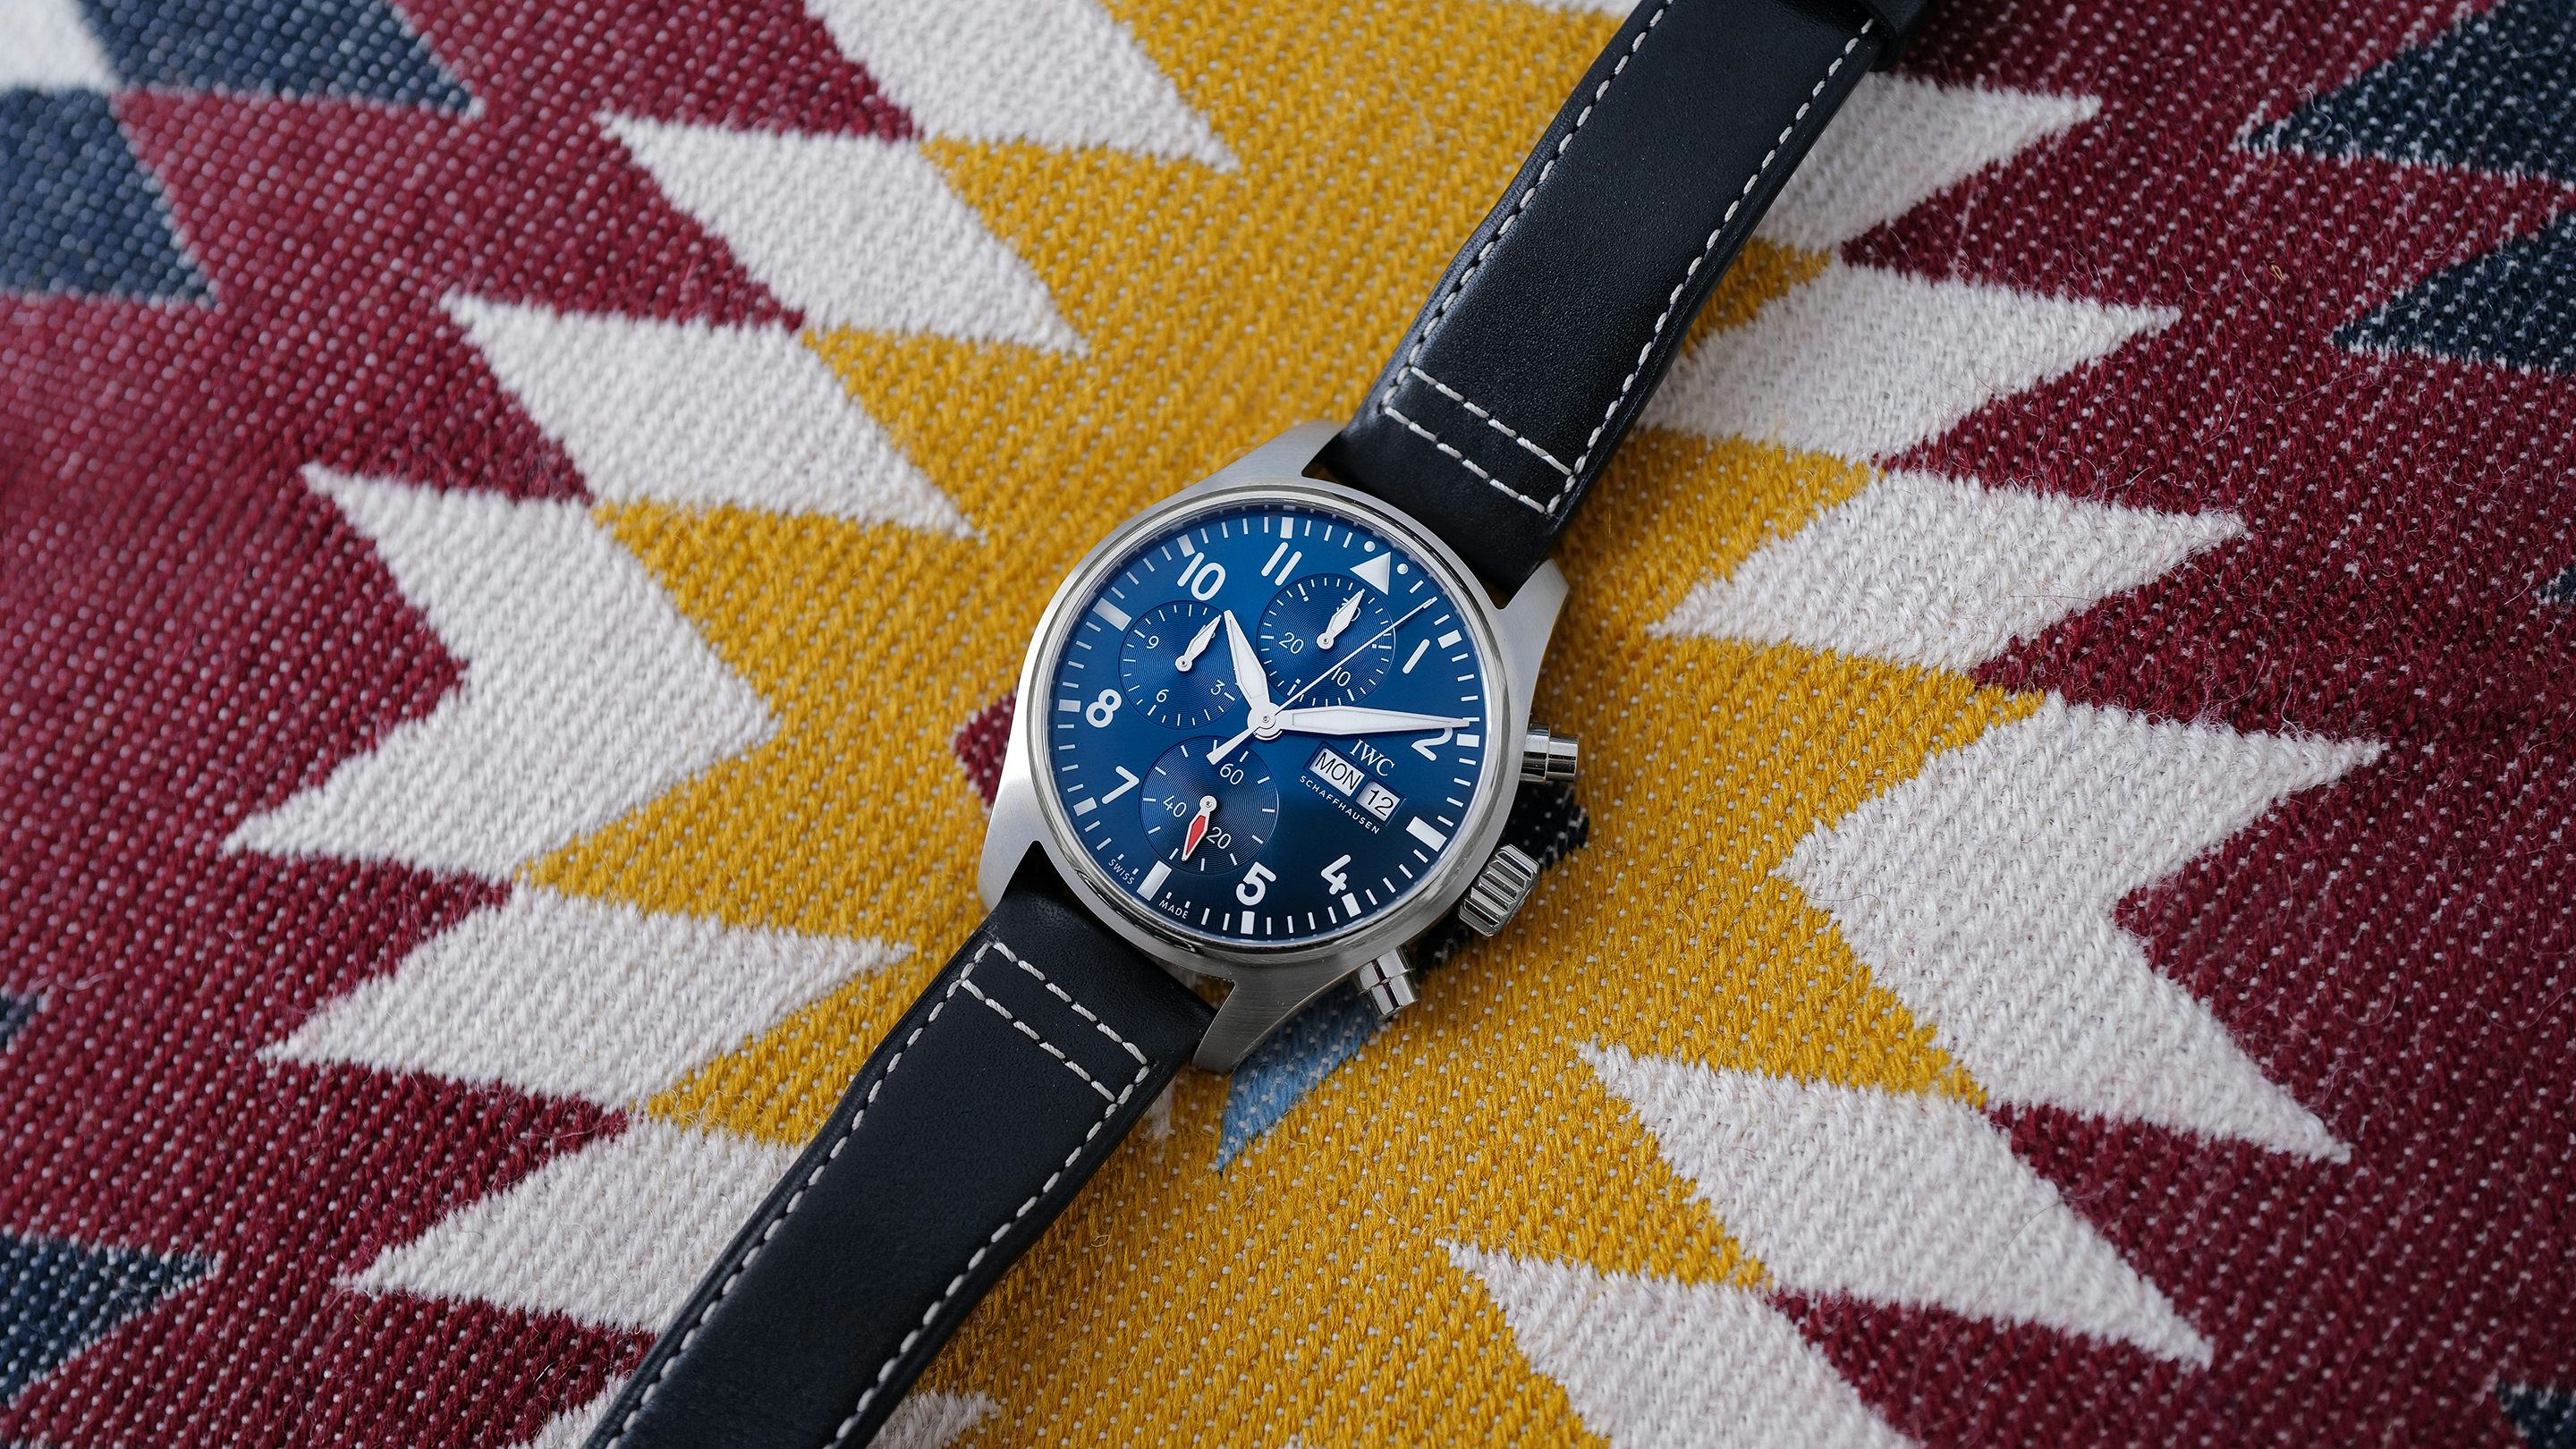 Introducing: An IWC Big Pilot For Purists - Hodinkee